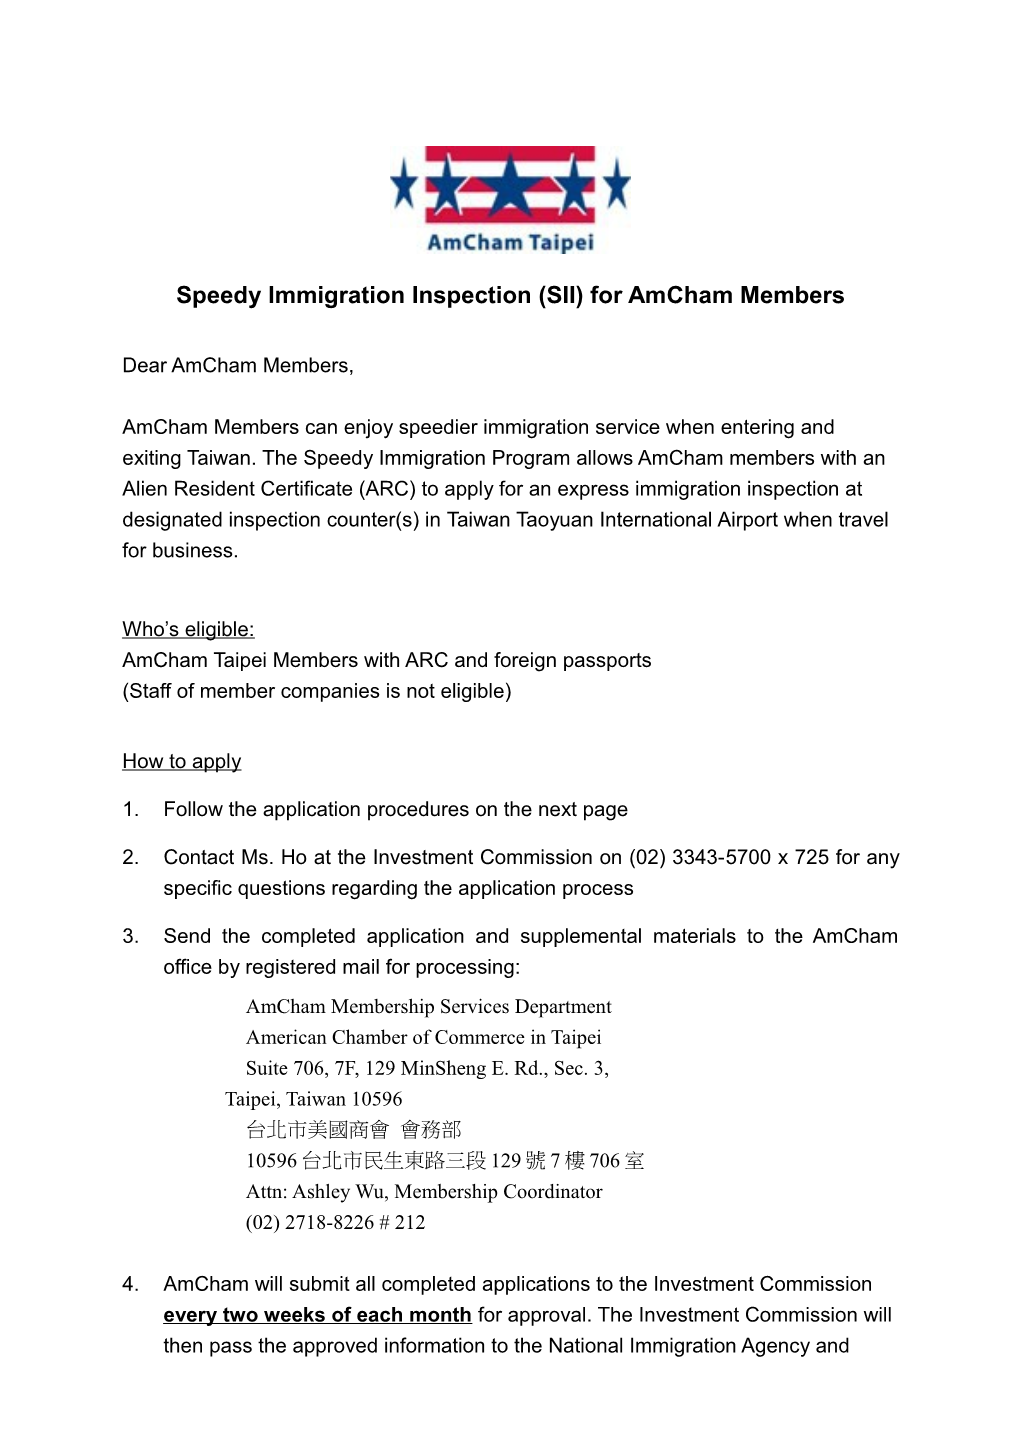 Speedy Immigration Inspection (SII) for Amcham Members